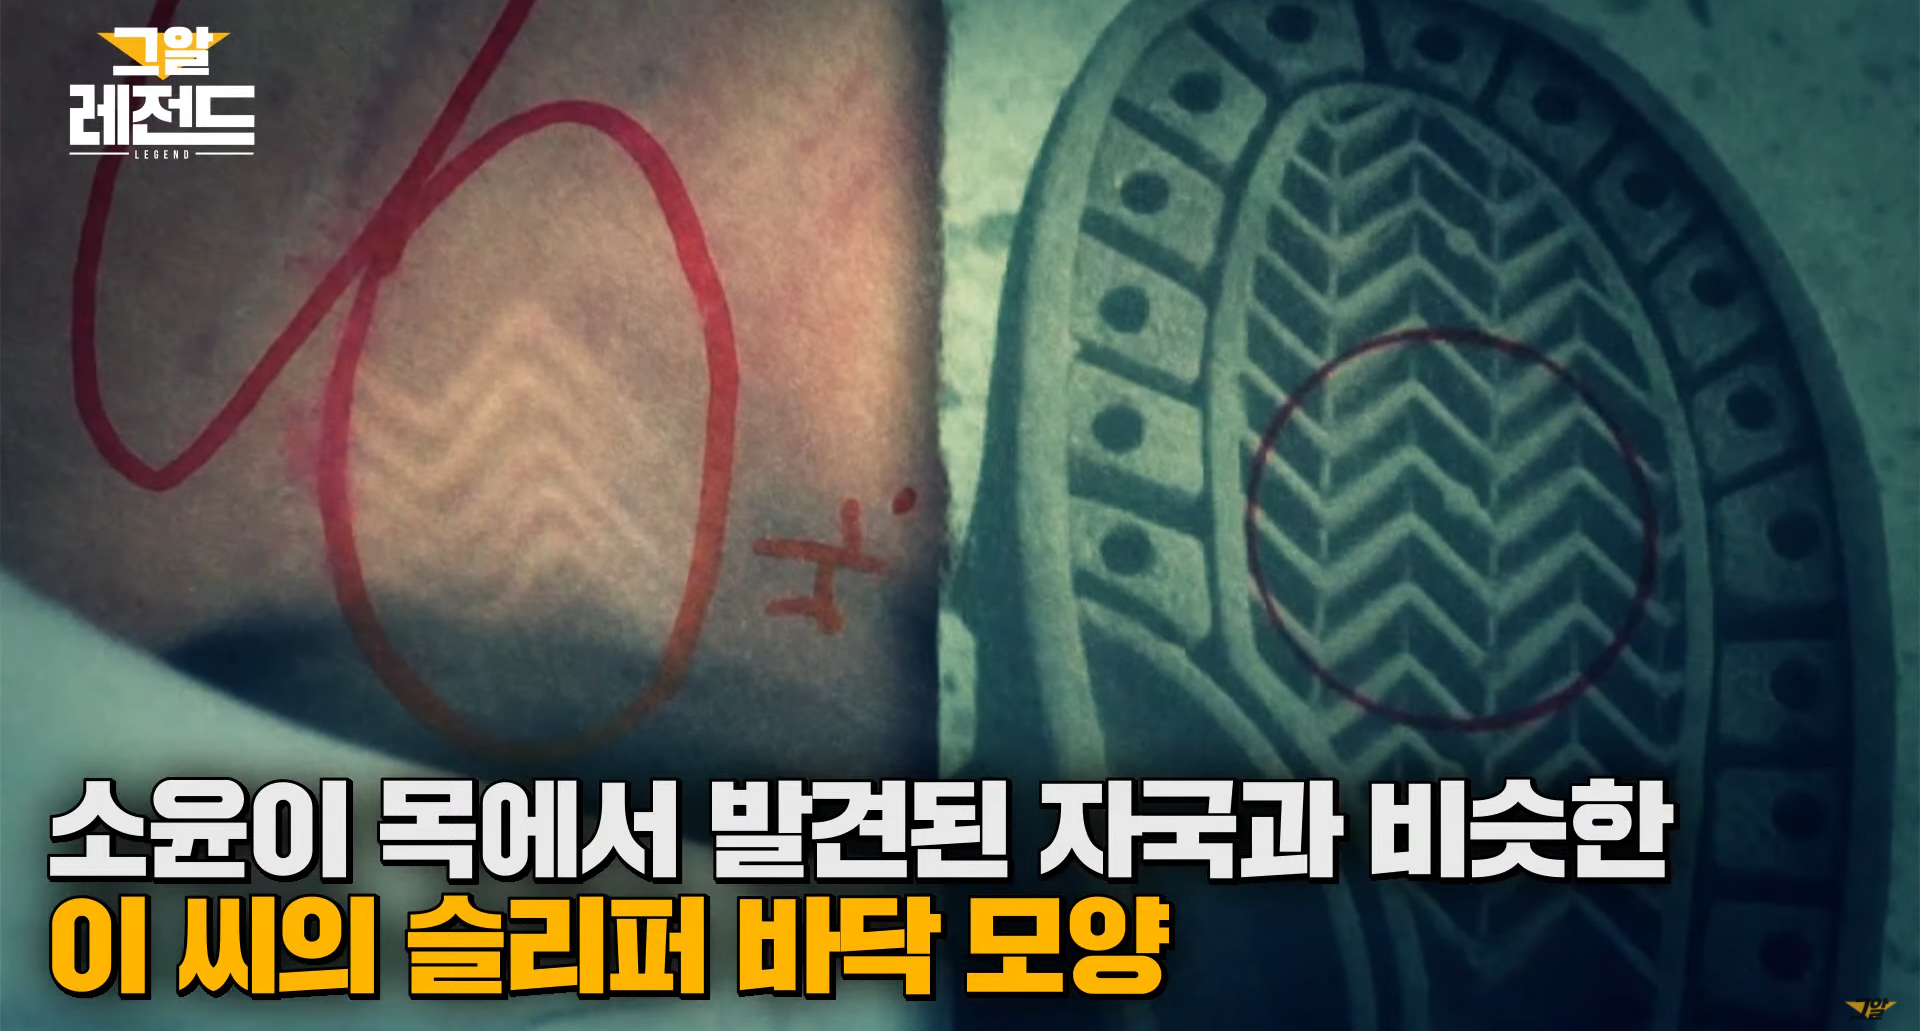 unsolved crimes in korea - shoe soles